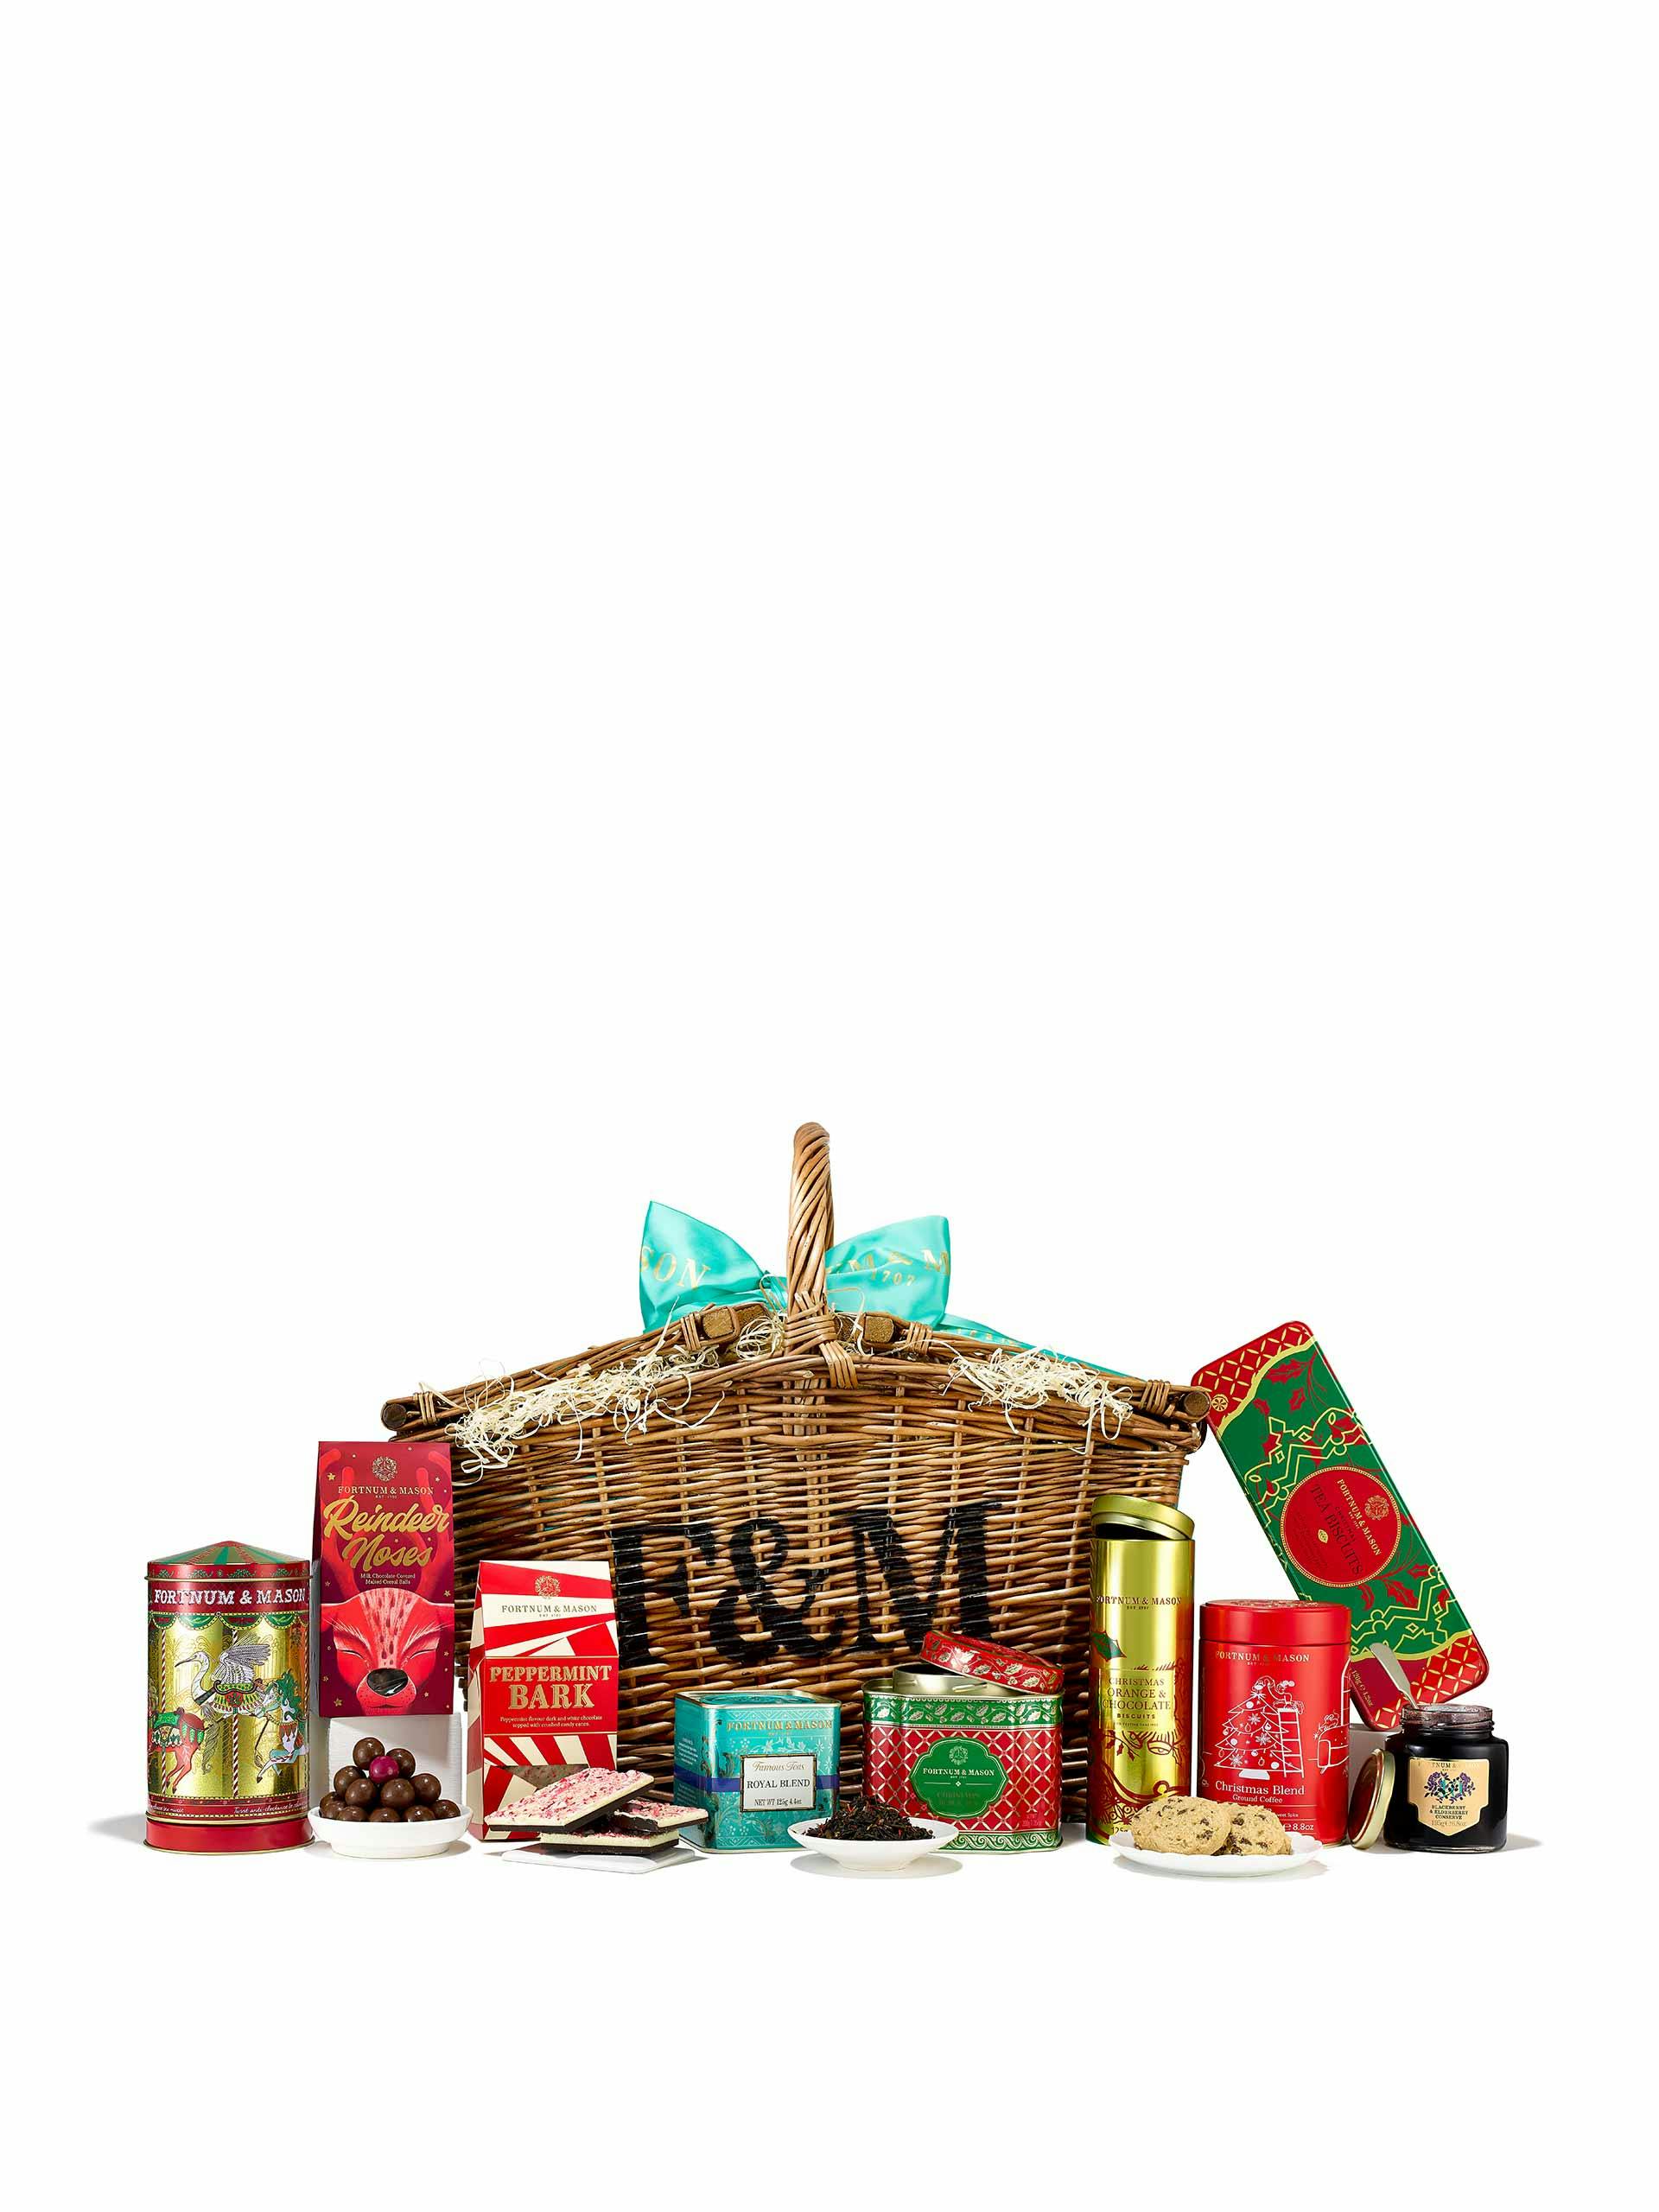 The Fortnum's Christmas collection hamper